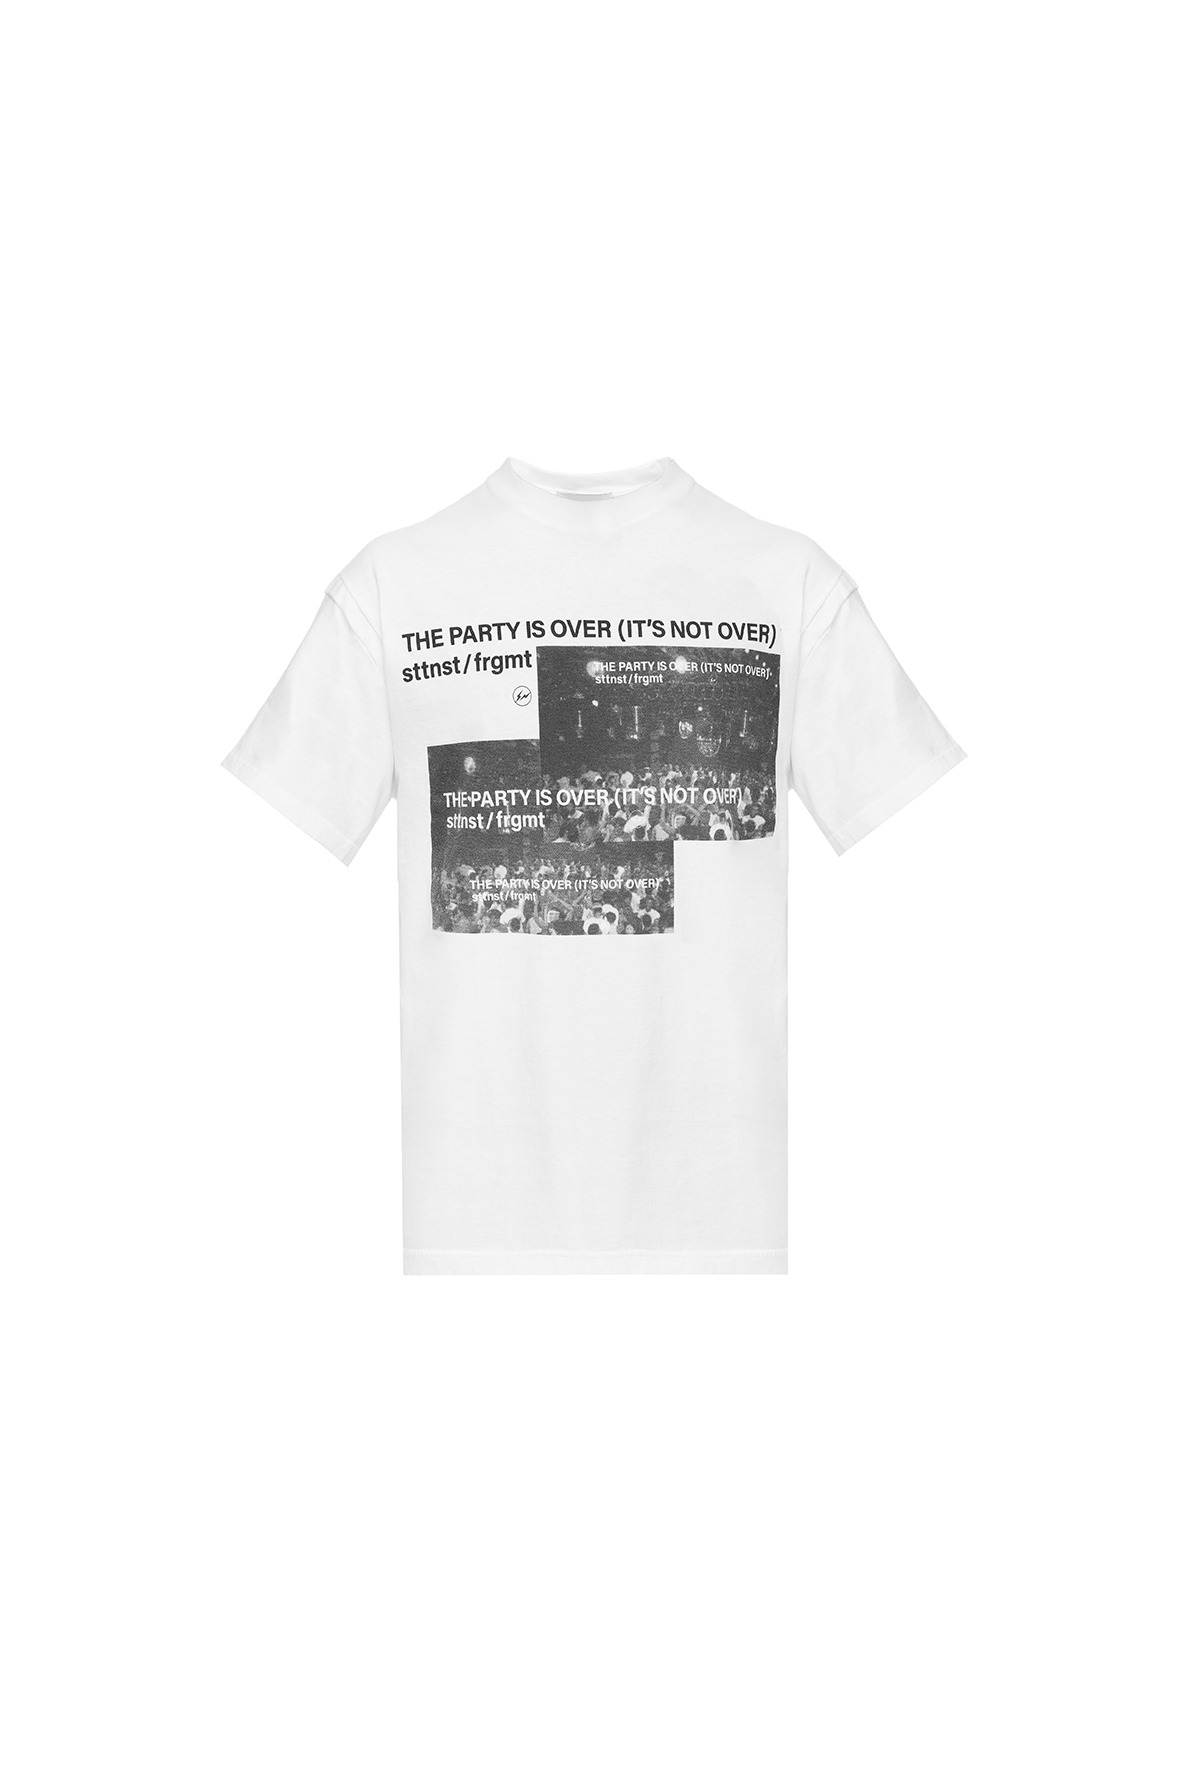 FRAGMENT x SITUATIONIST T-SHIRT